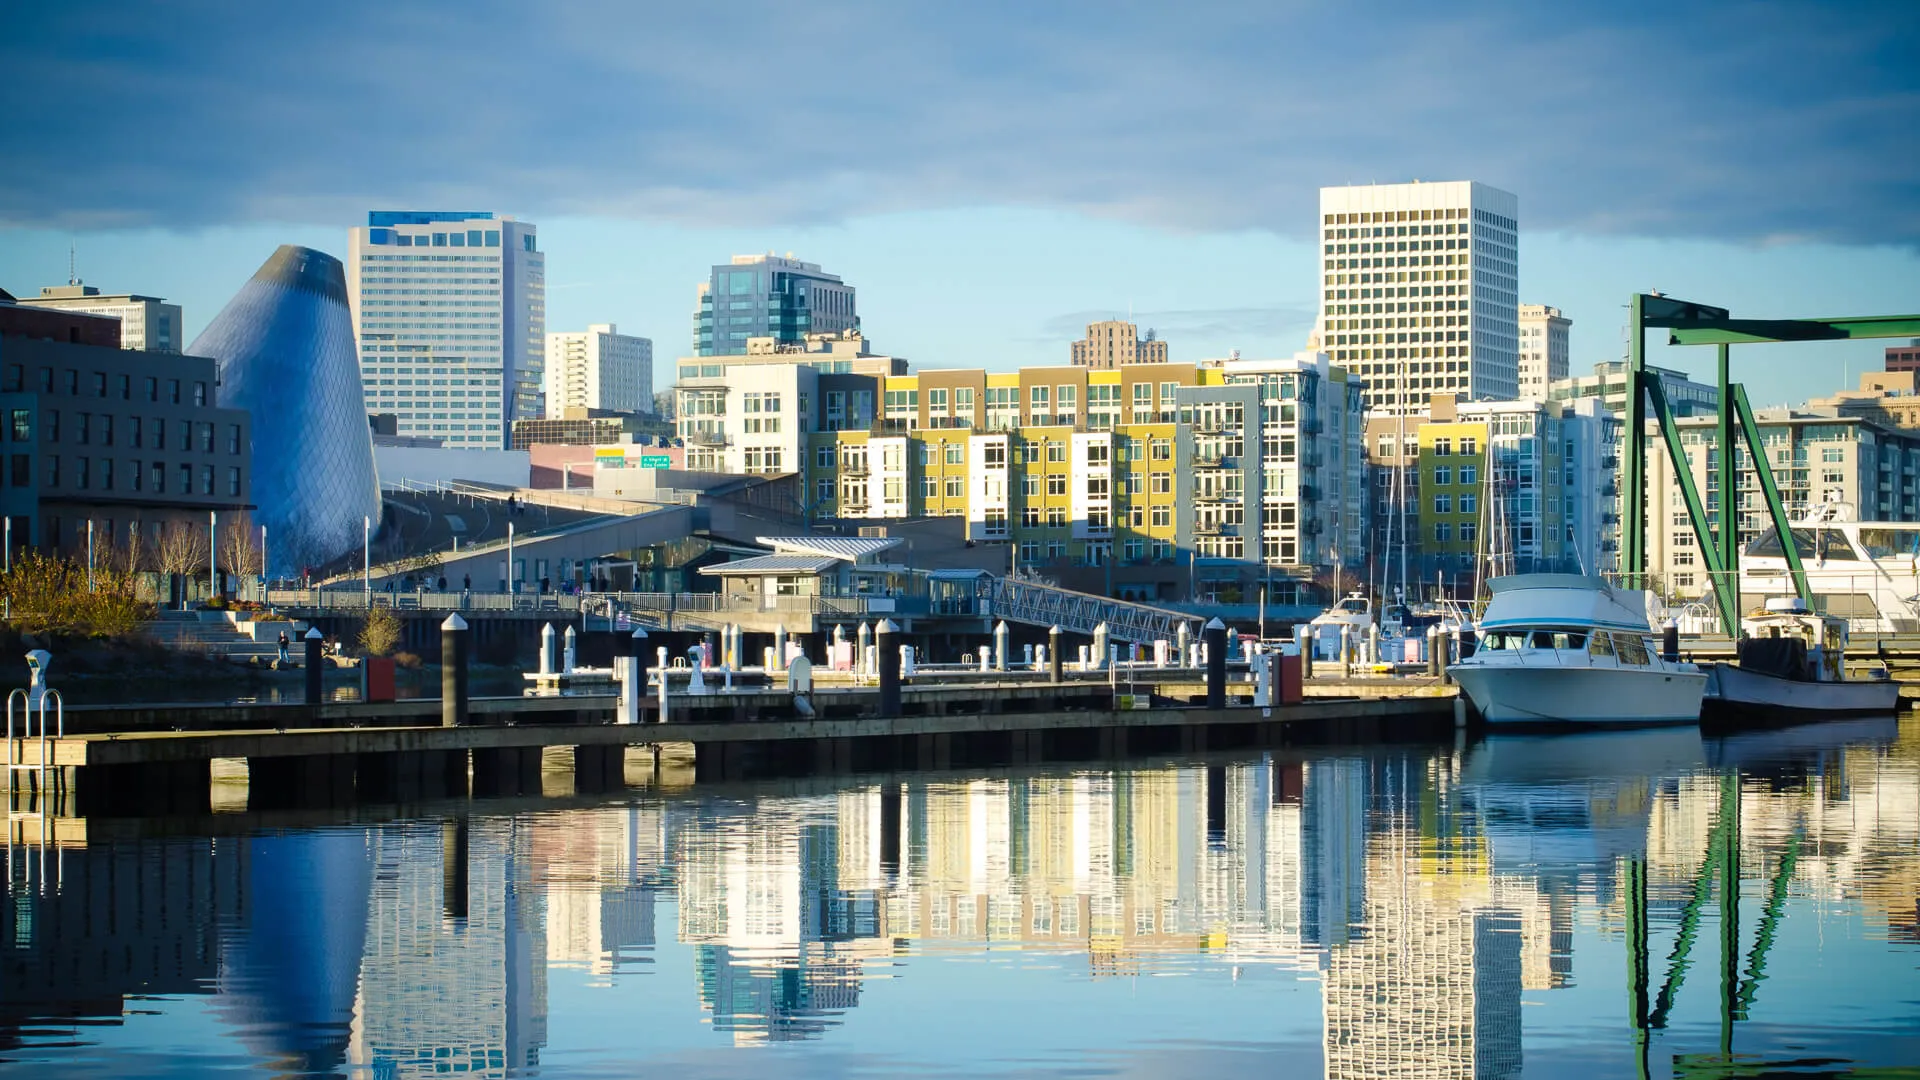 Skyline consisting of office buildings, condominiums and museums of Tacoma, WA reflects off of the Foss Waterway.